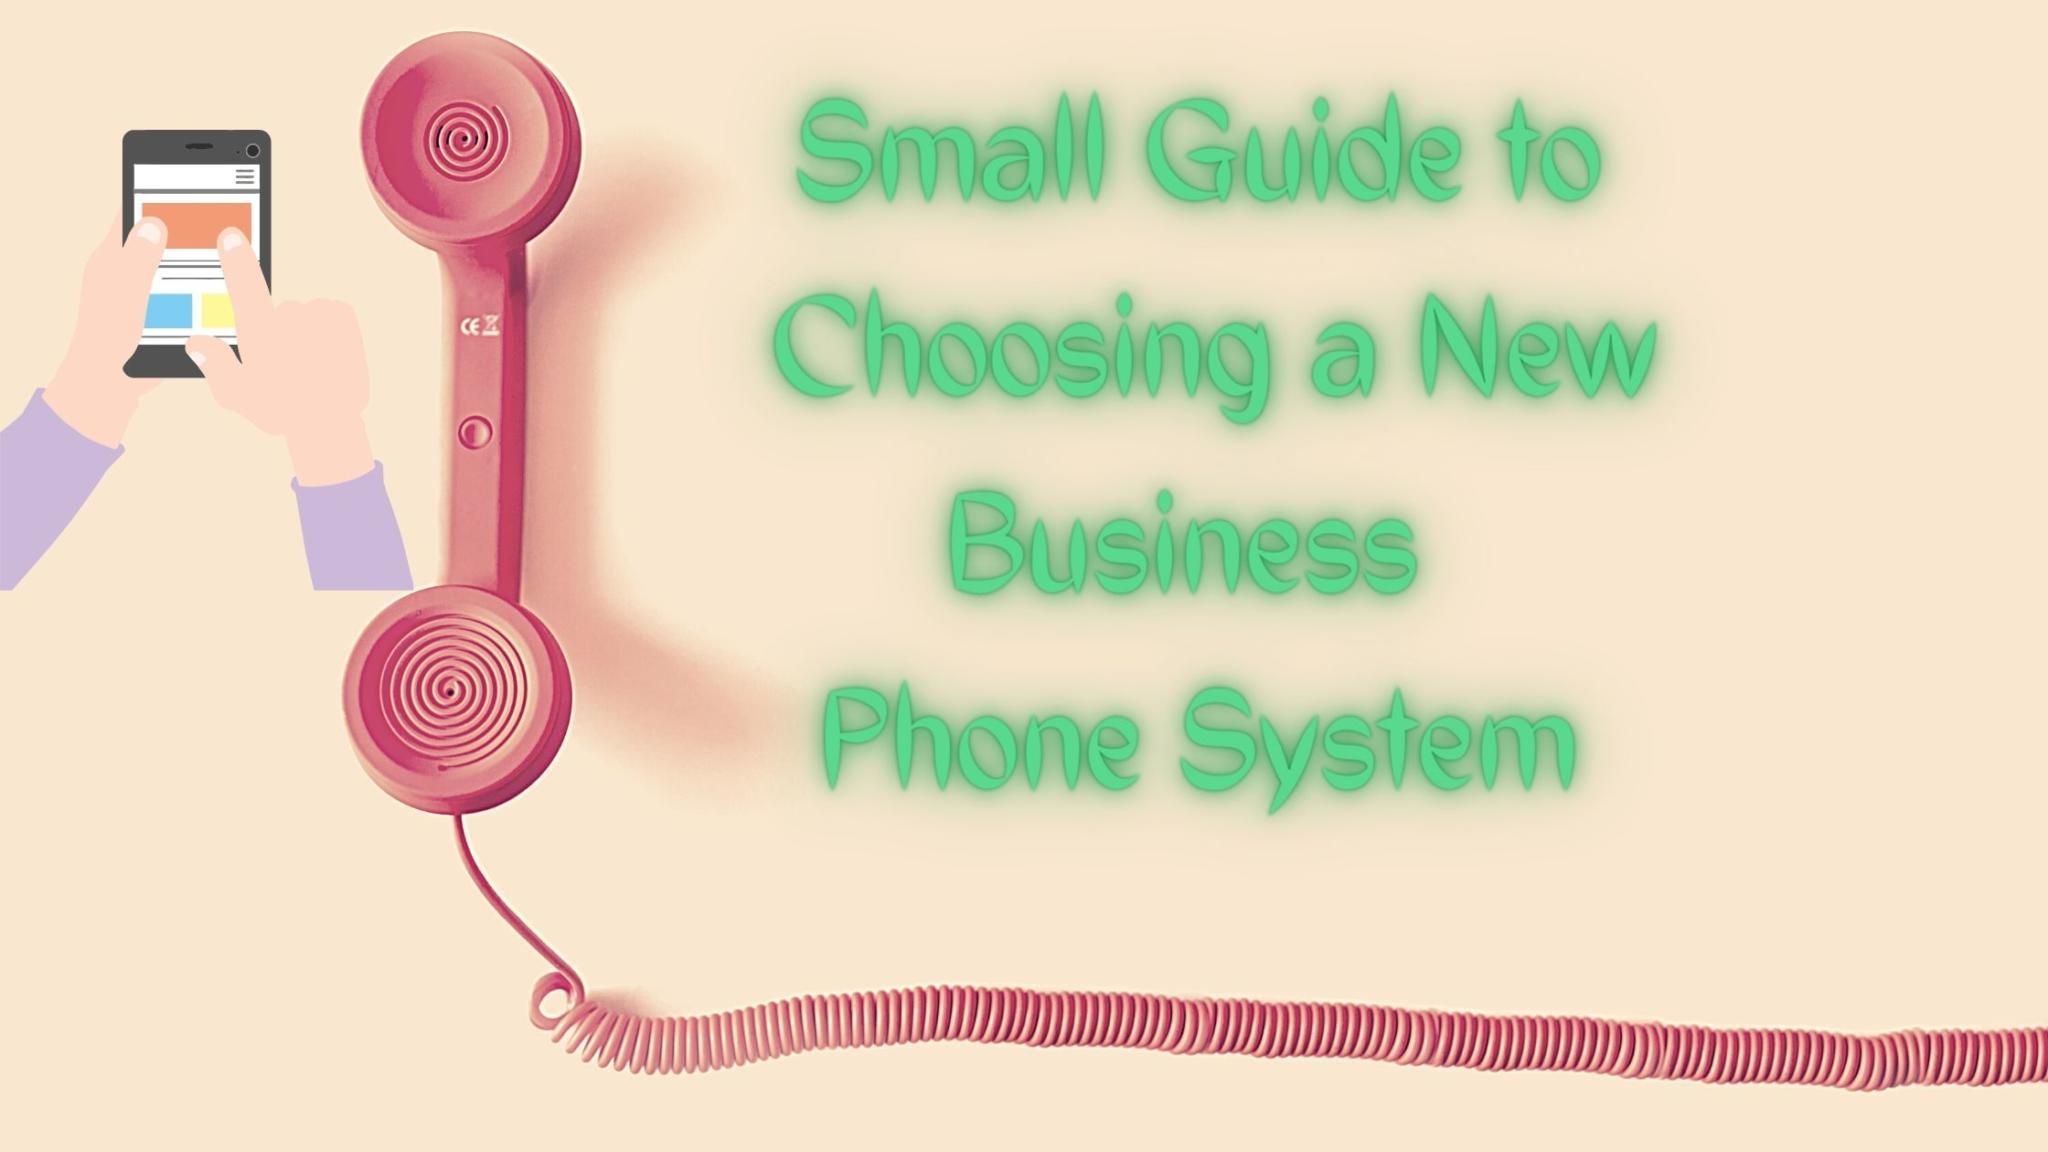 Phone System for small businesses shown